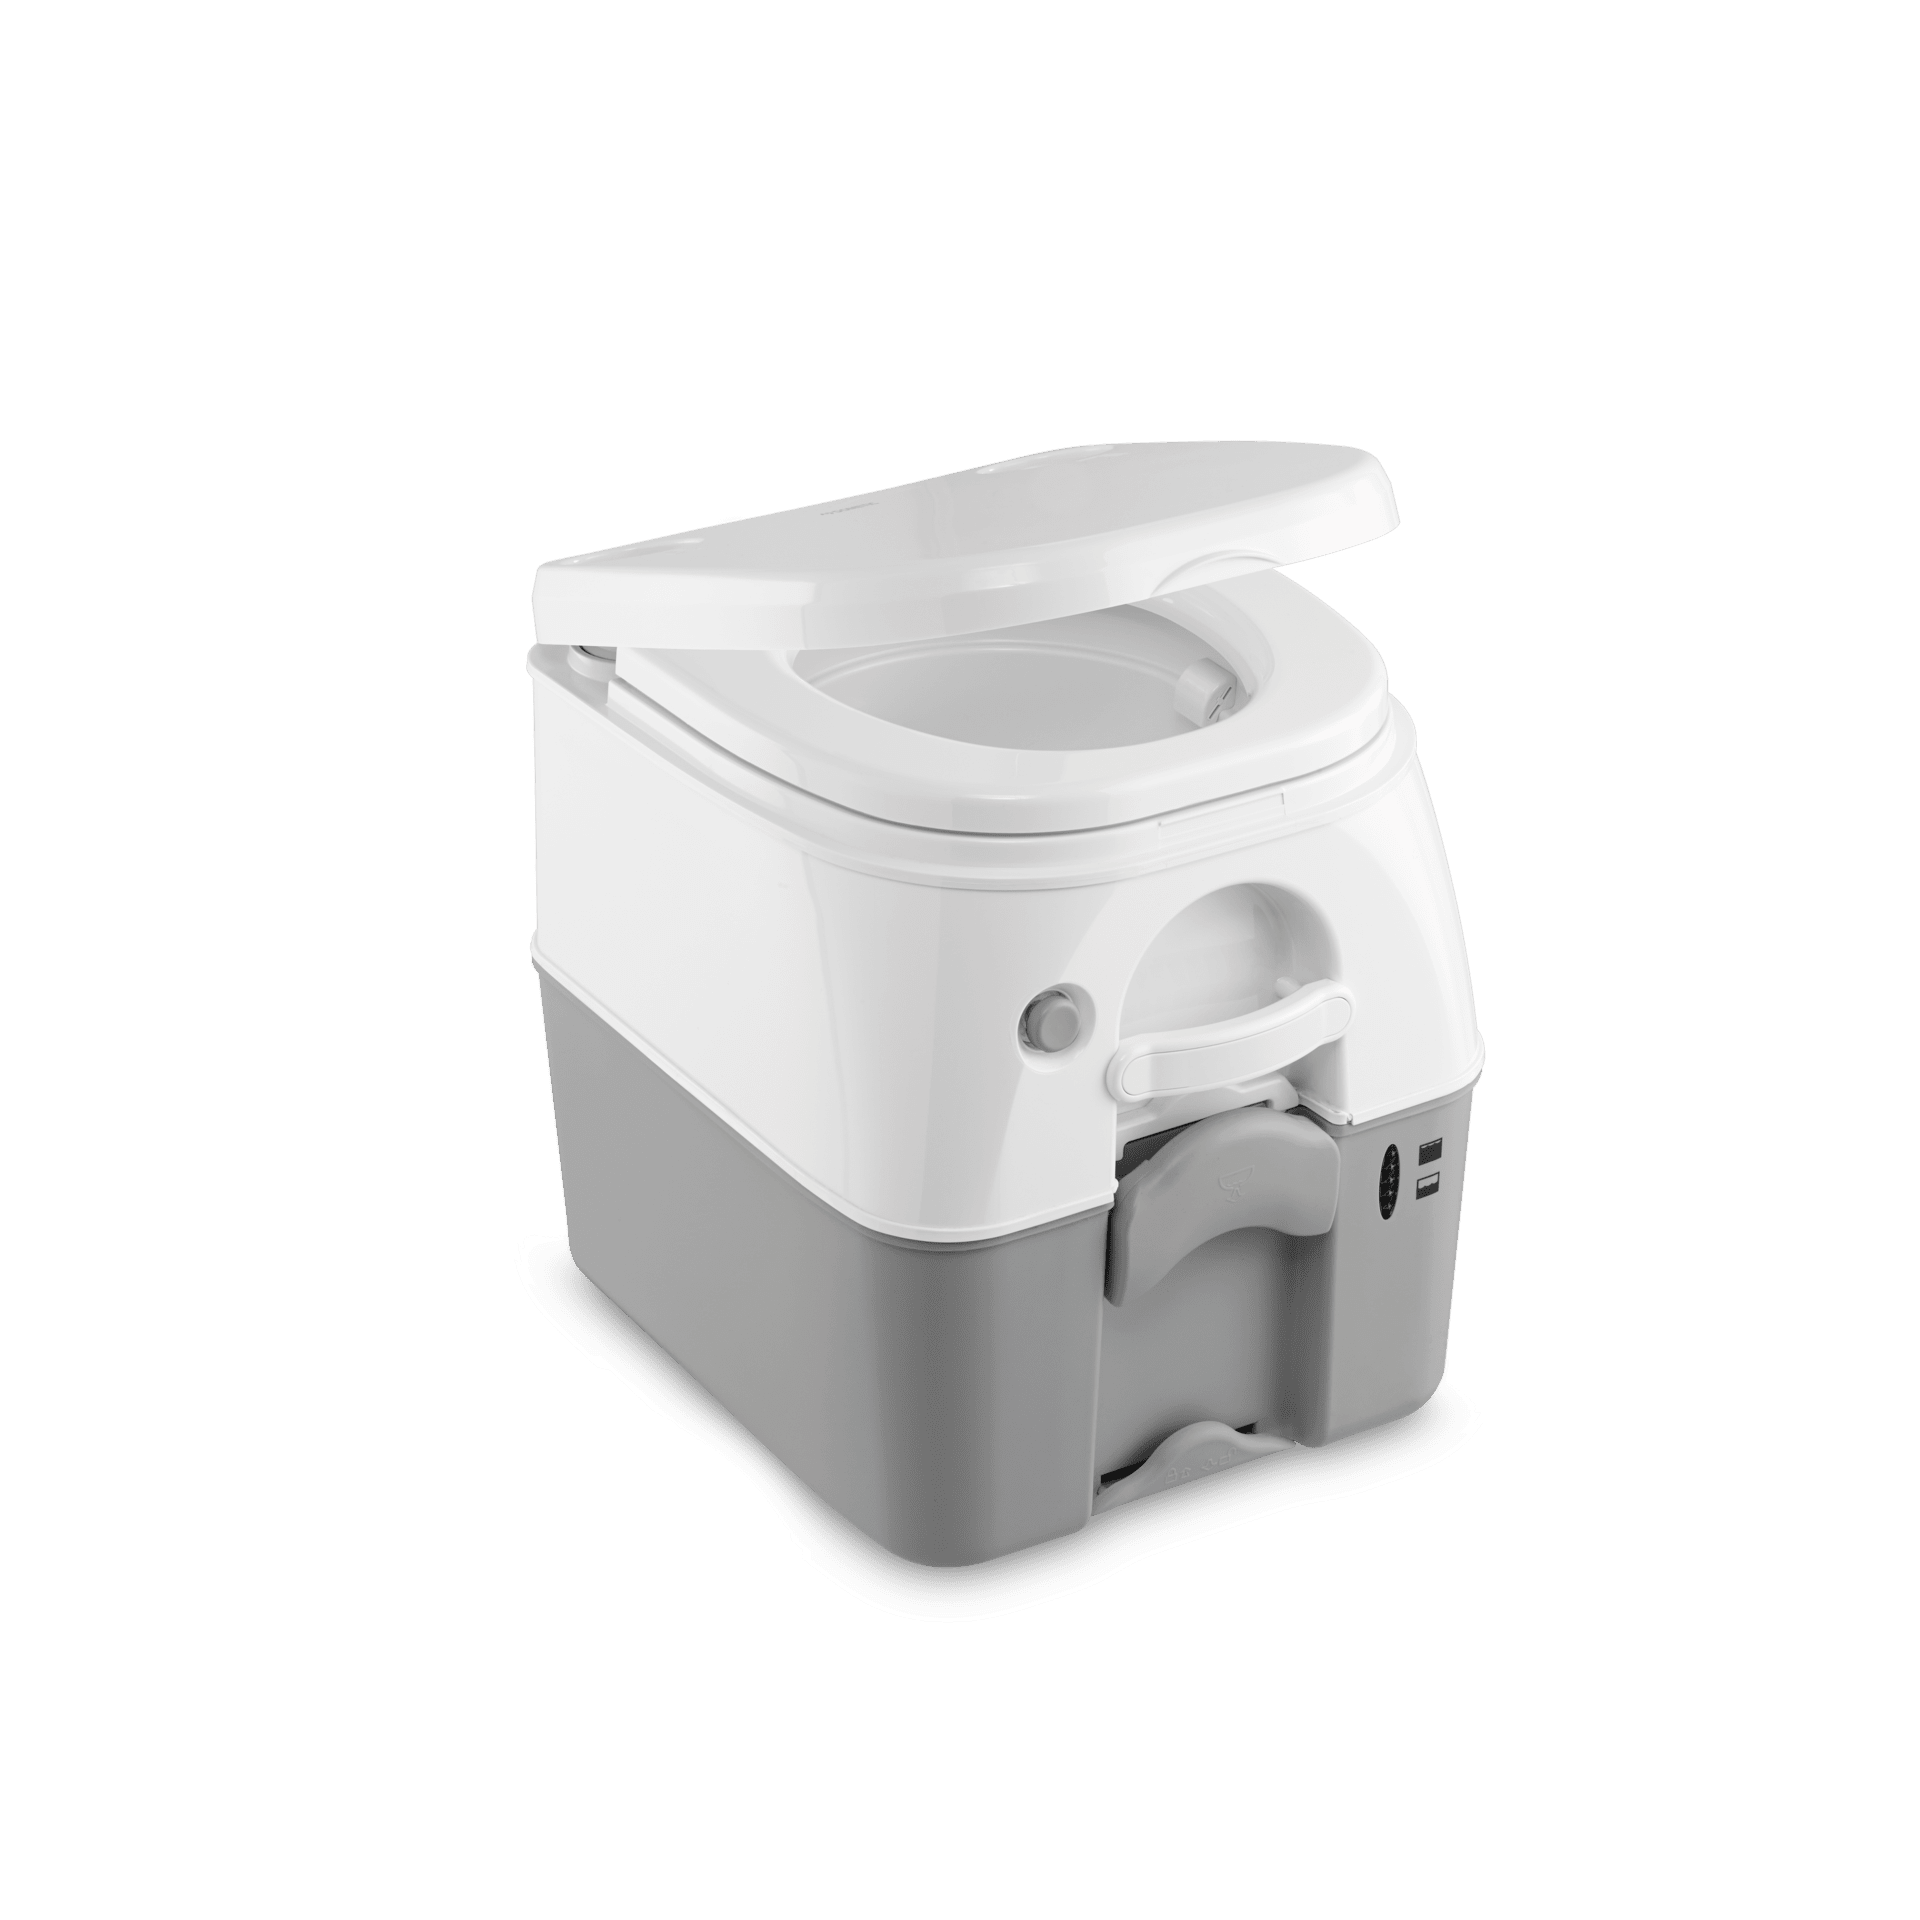  Dometic 300 Series Gravity-Flush RV Toilet - Powerful  Triple-Jet Action Flush with Adjustable Water Level - Standard Height Flush  with Foot Pedal for RVs, Trailers, and Outdoor Campers : Automotive